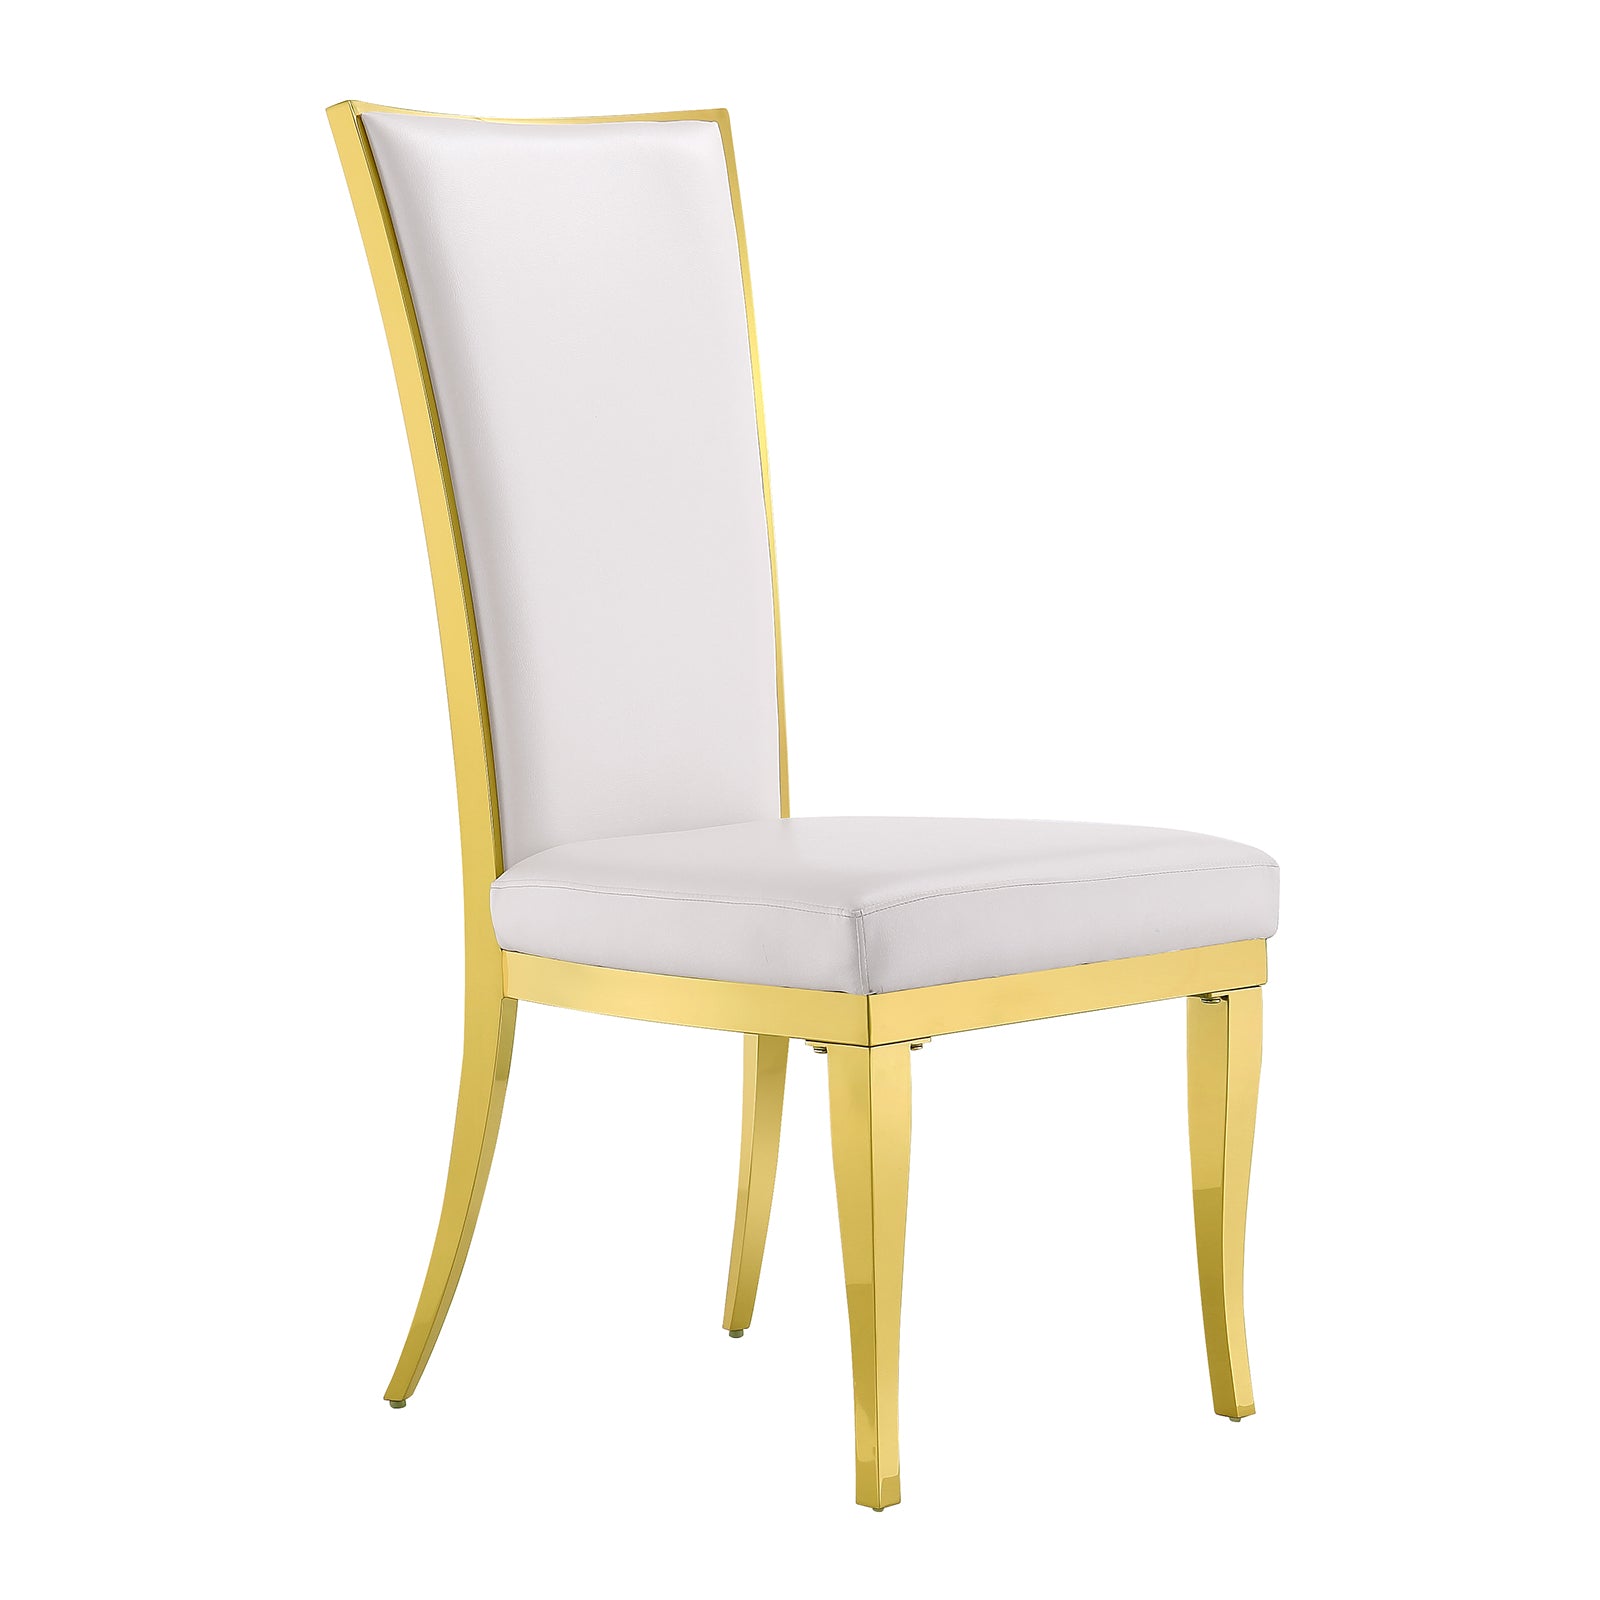 Elevate Your Dining Experience with Our Luxurious White Faux Leather Dining Chairs